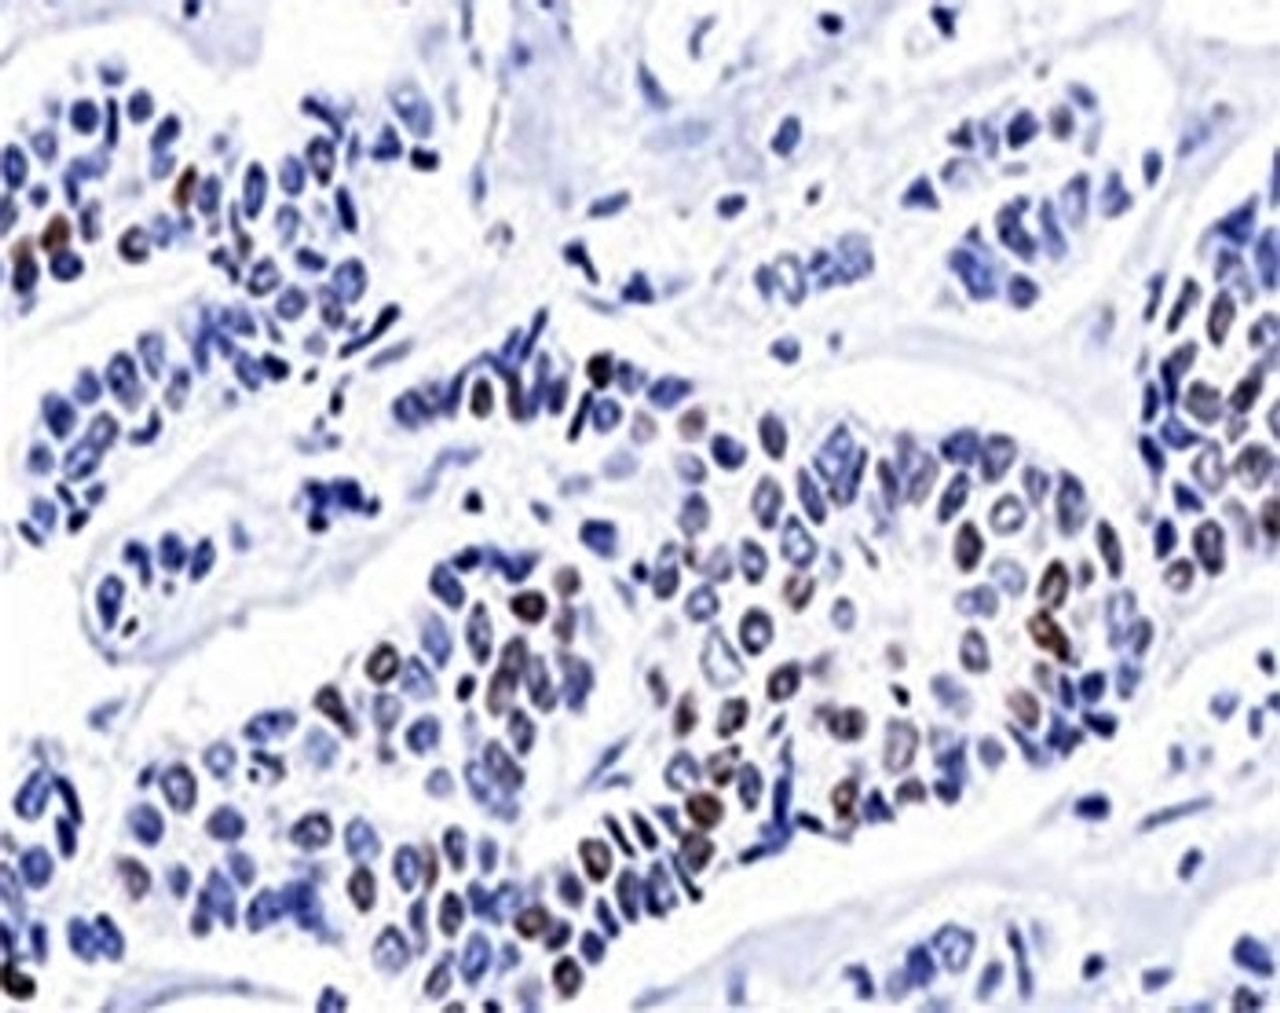 IHC testing of invasive ductal carcinoma stained with progesterone receptor antibody (PR501) .